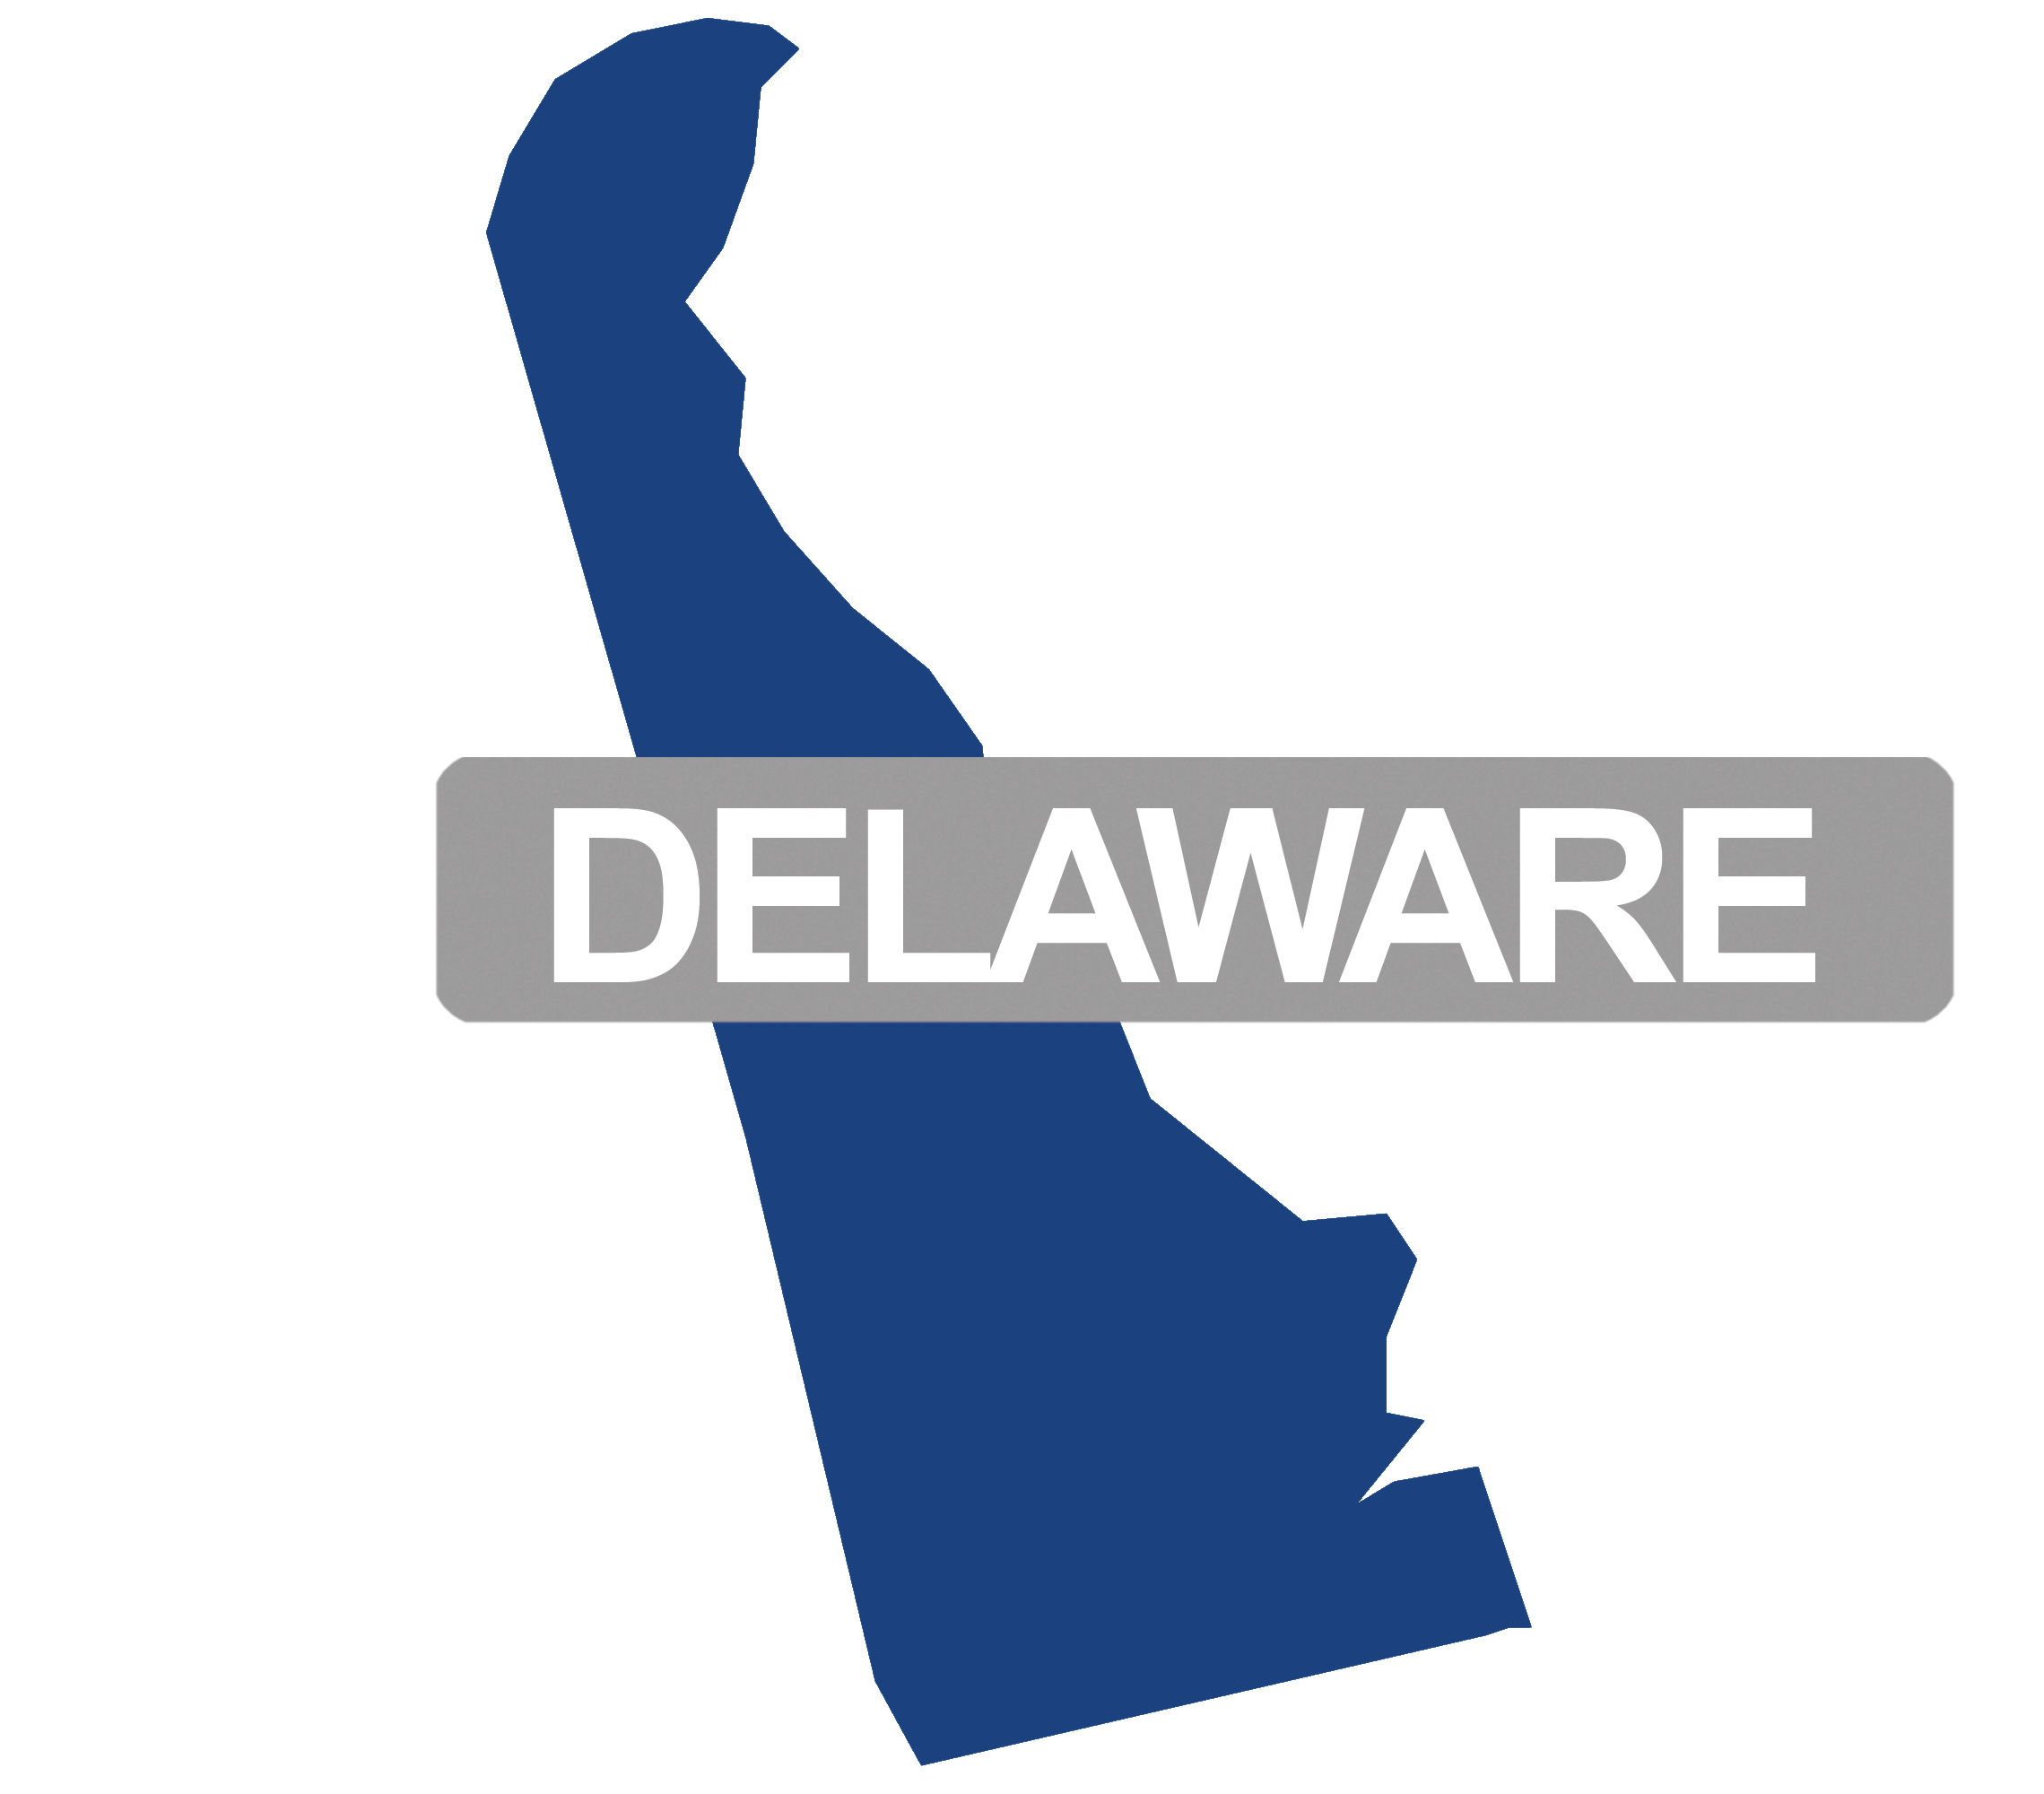 How To Apply For Food Stamps And Medicaid In Delaware